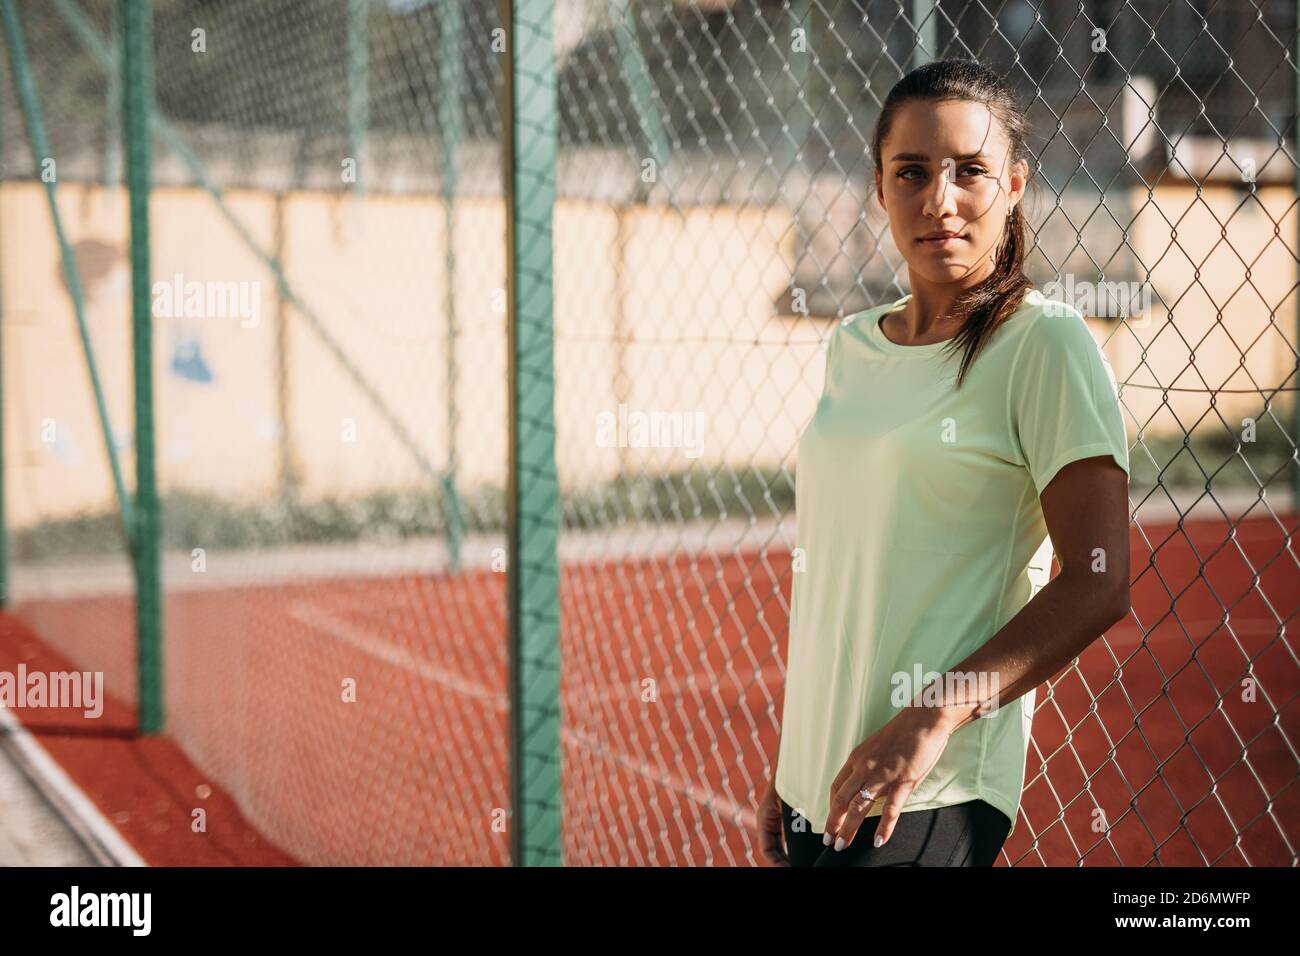 Woman having break during workout near chain link fence Stock Photo